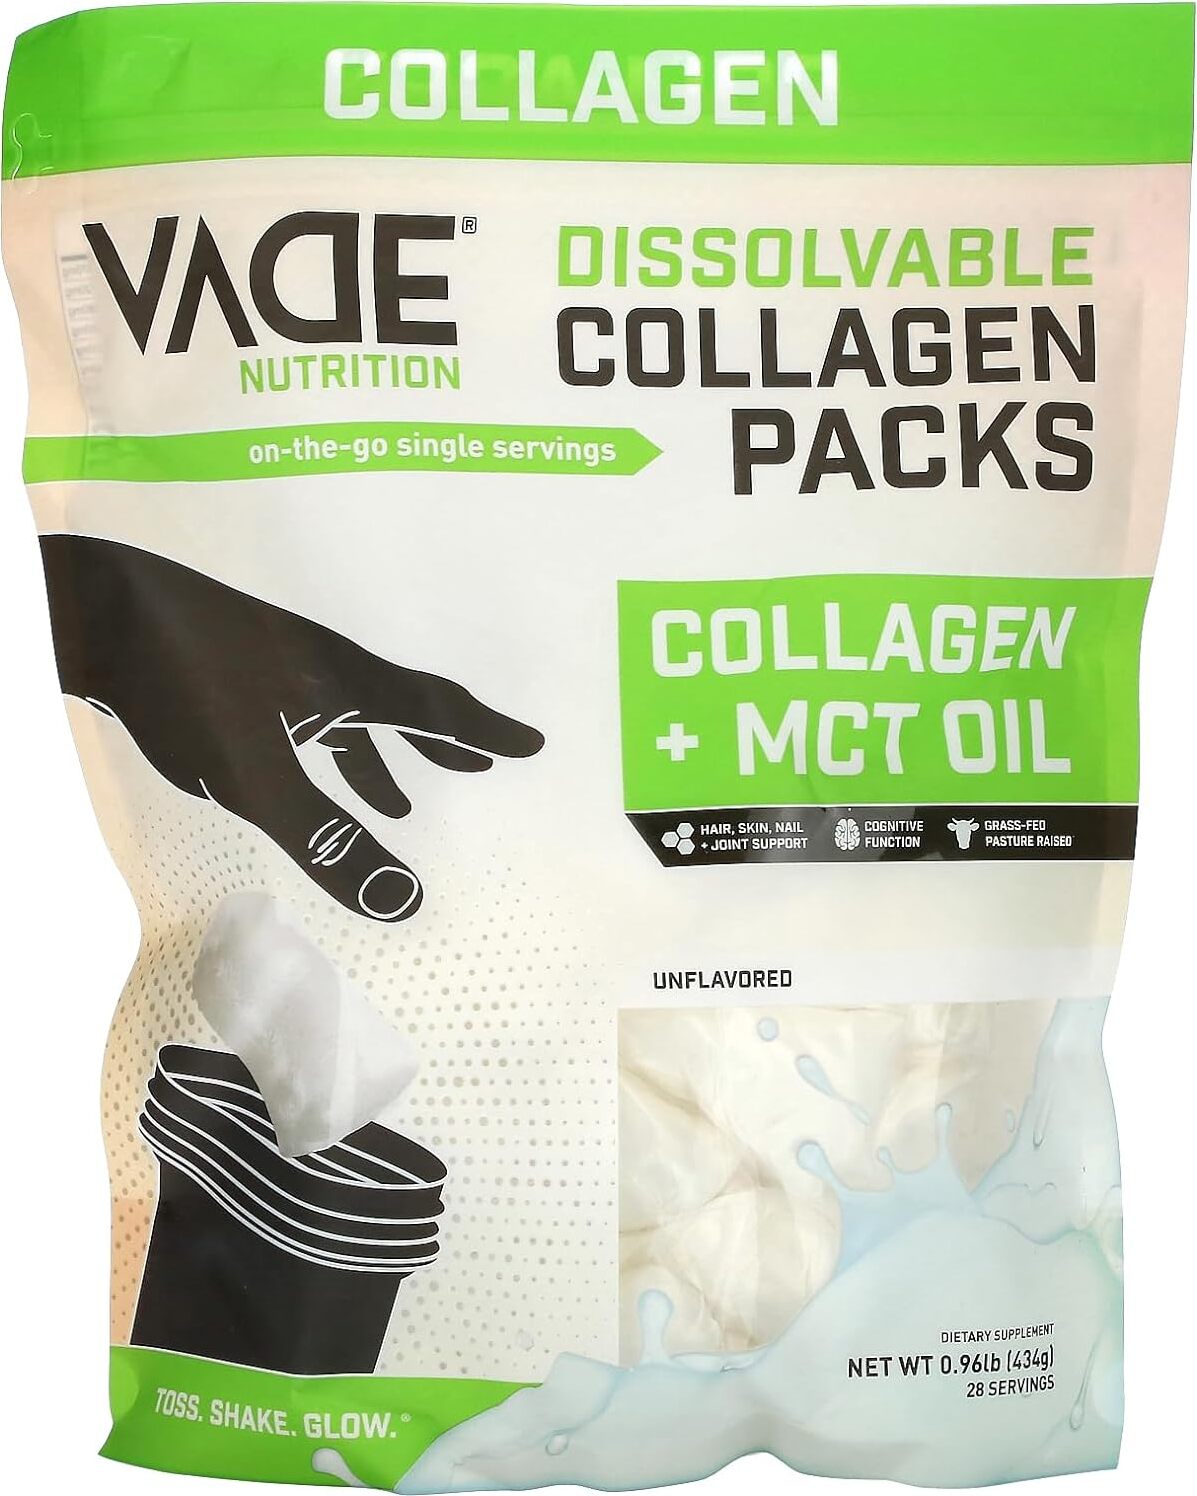 https://www.priceplow.com/static/images/products/vade-nutrition-dissolvable-collagen-packs-mct-oil.jpg